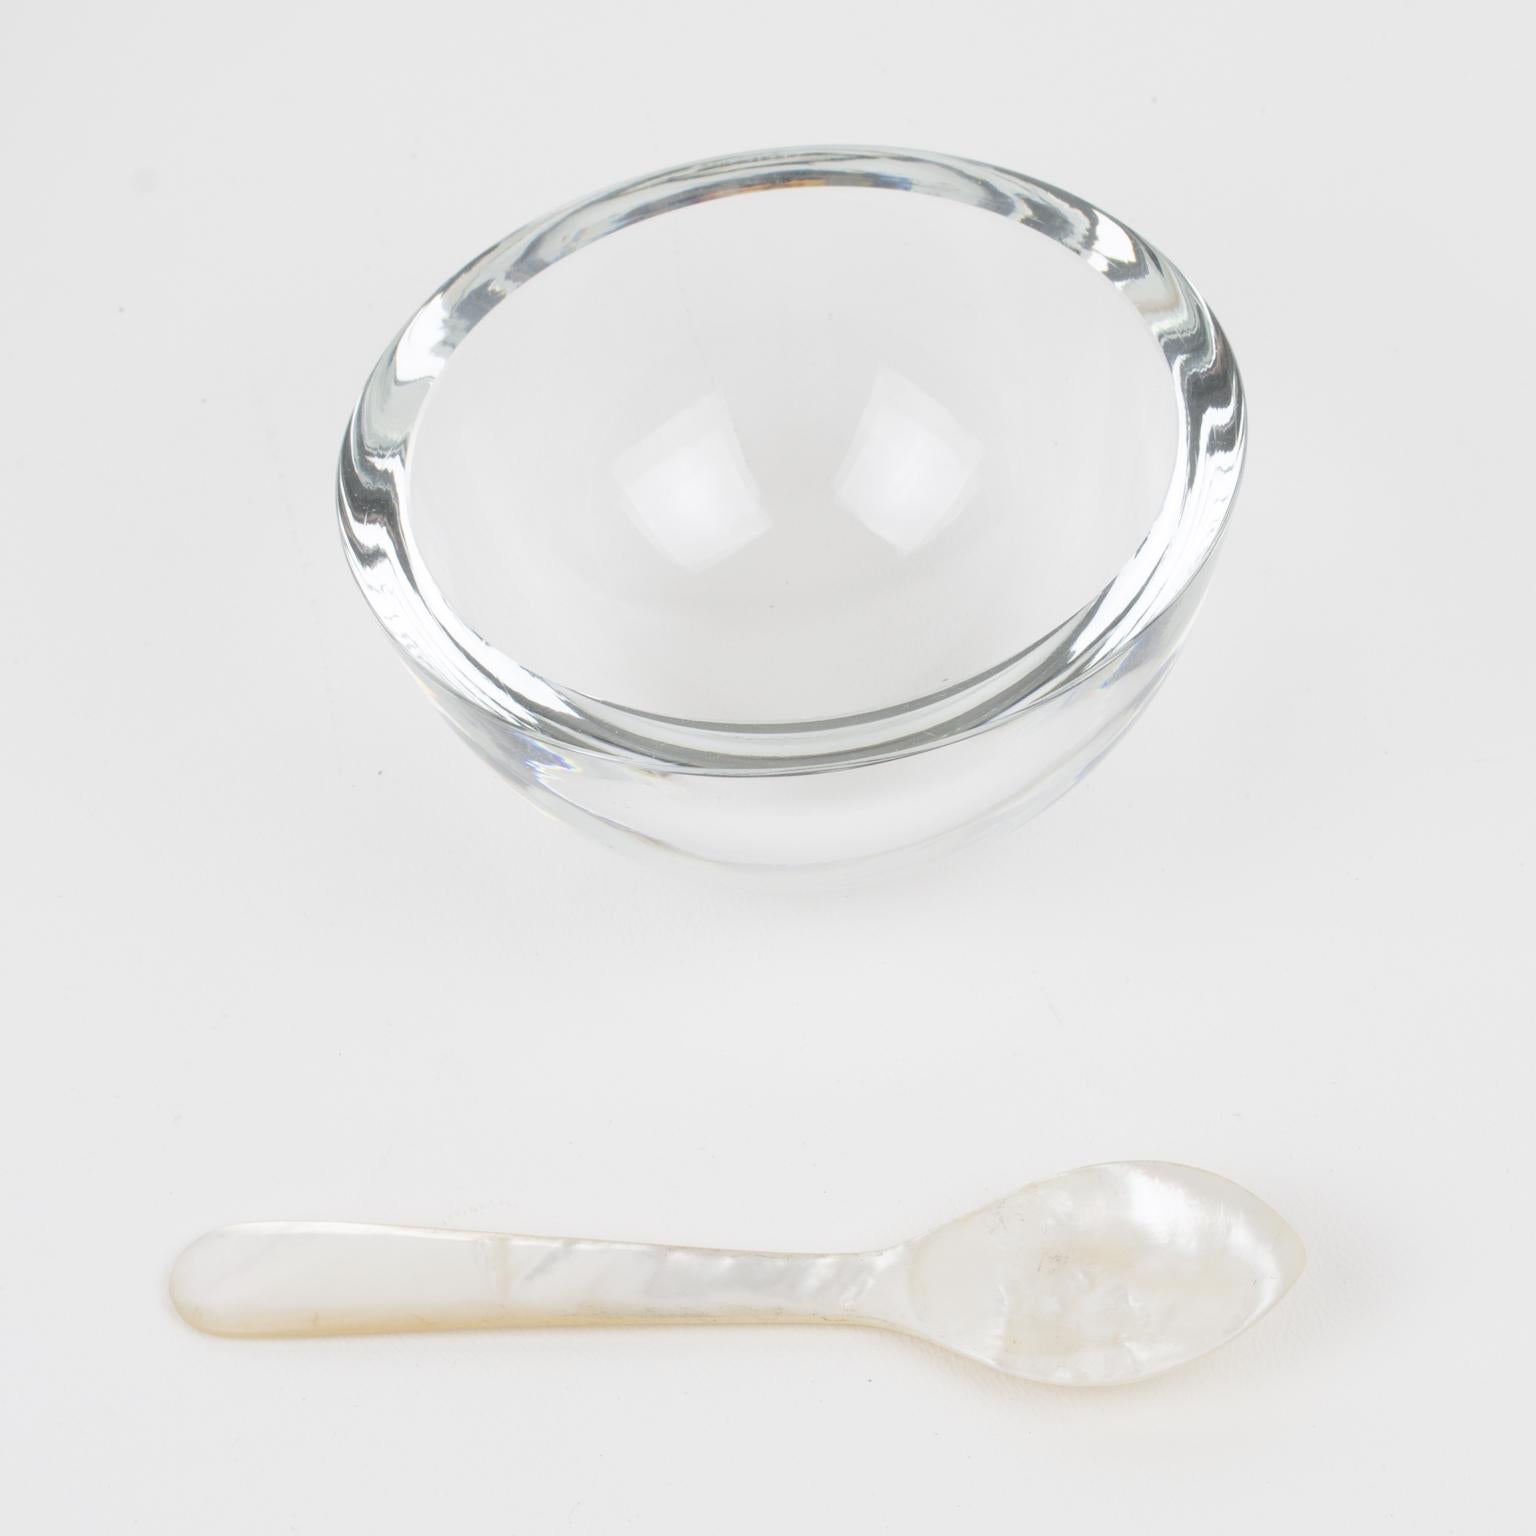 Silver Plate and Crystal Caviar Bowl Dish by Nan Swid for SwidPowell 1